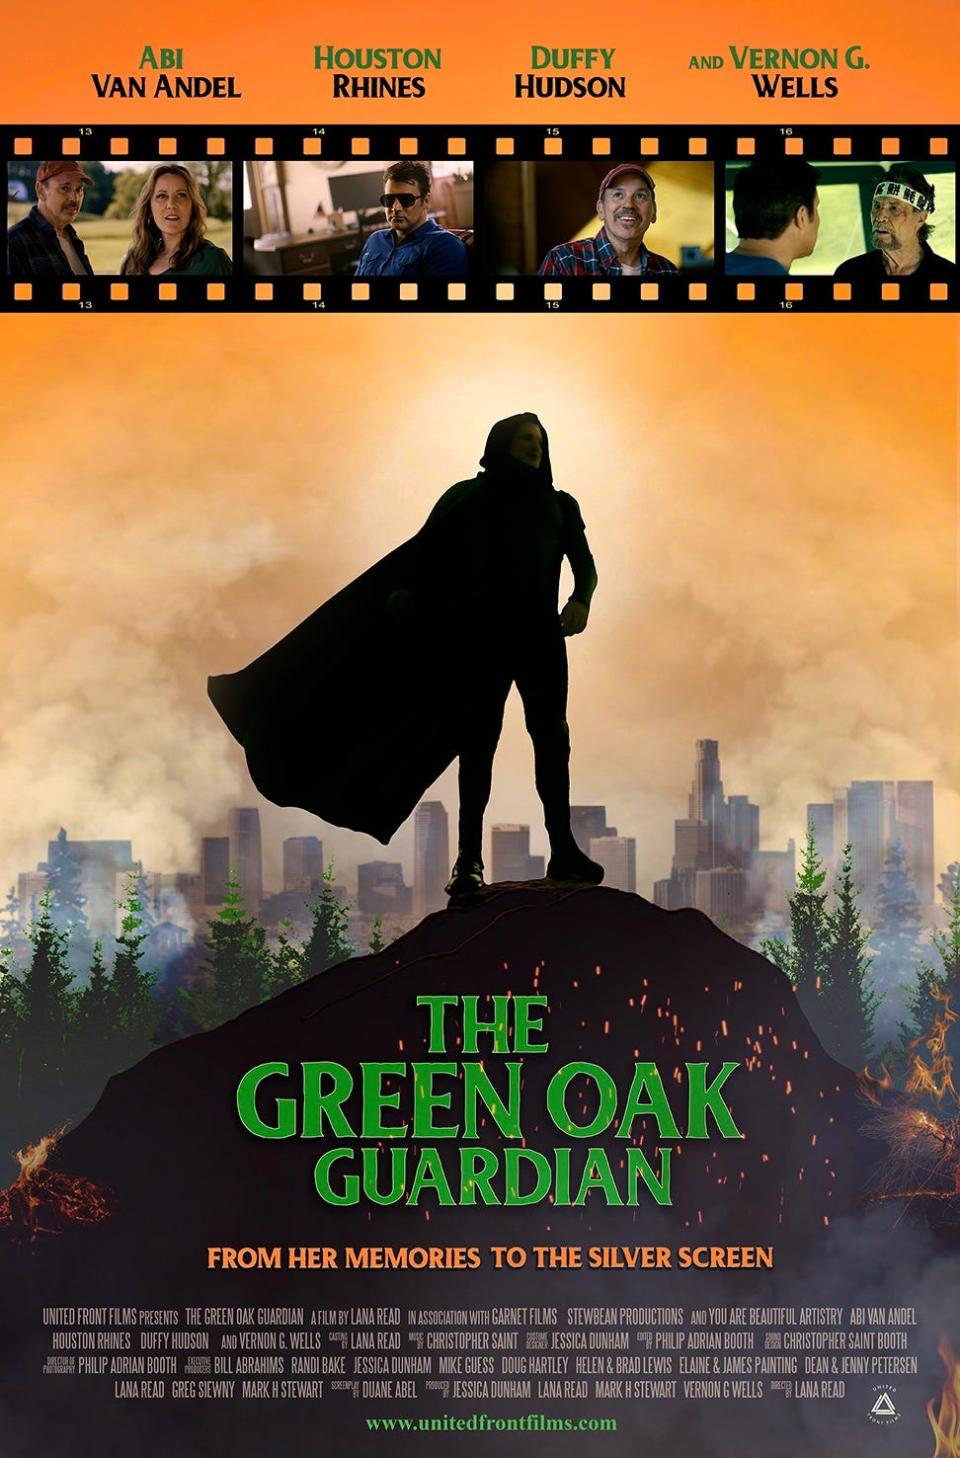 "The Green Oak Guardian," a movie filmed entirely in Carroll County, will have its premiere on May 20 at the Lions Lincoln Theatre in Massillon.